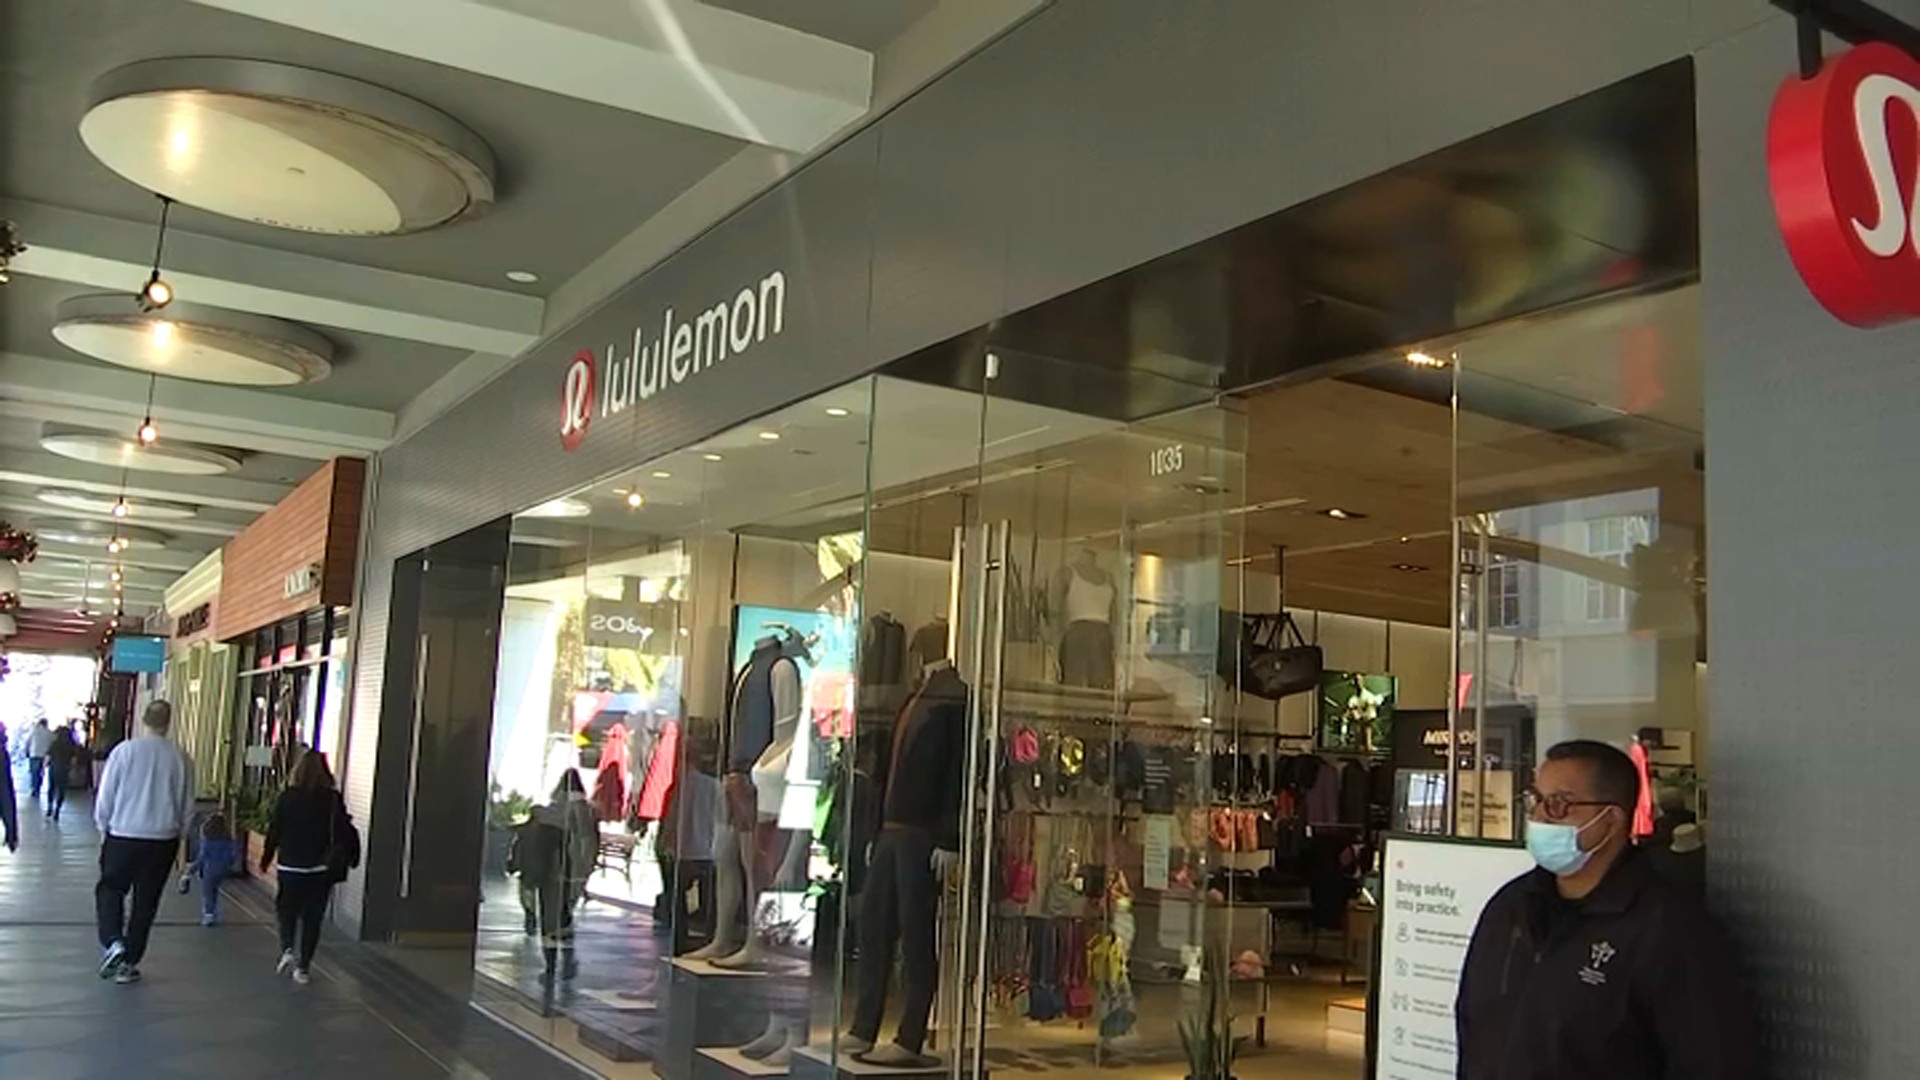 Louis Vuitton Store Robbed in San Francisco's Union Square – NBC